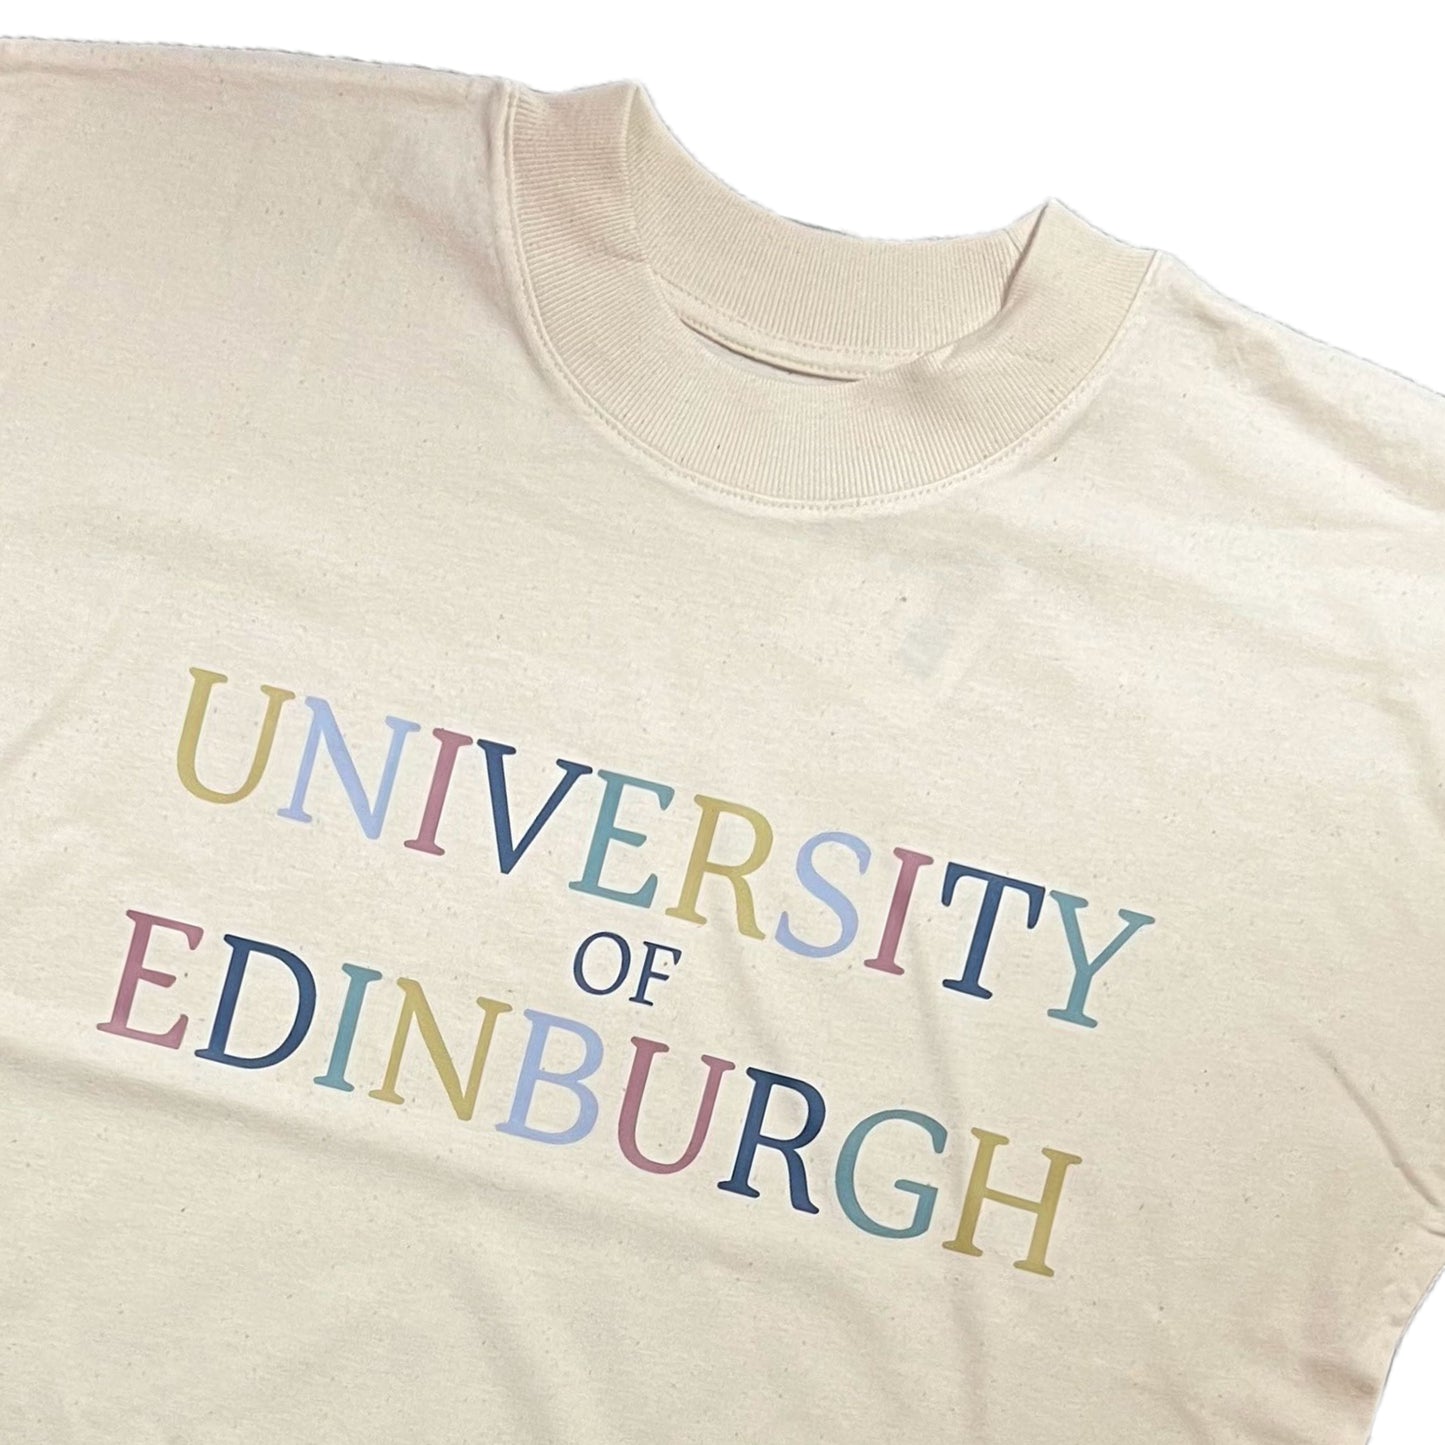 Close-up of colour text on oversized T-shirt.